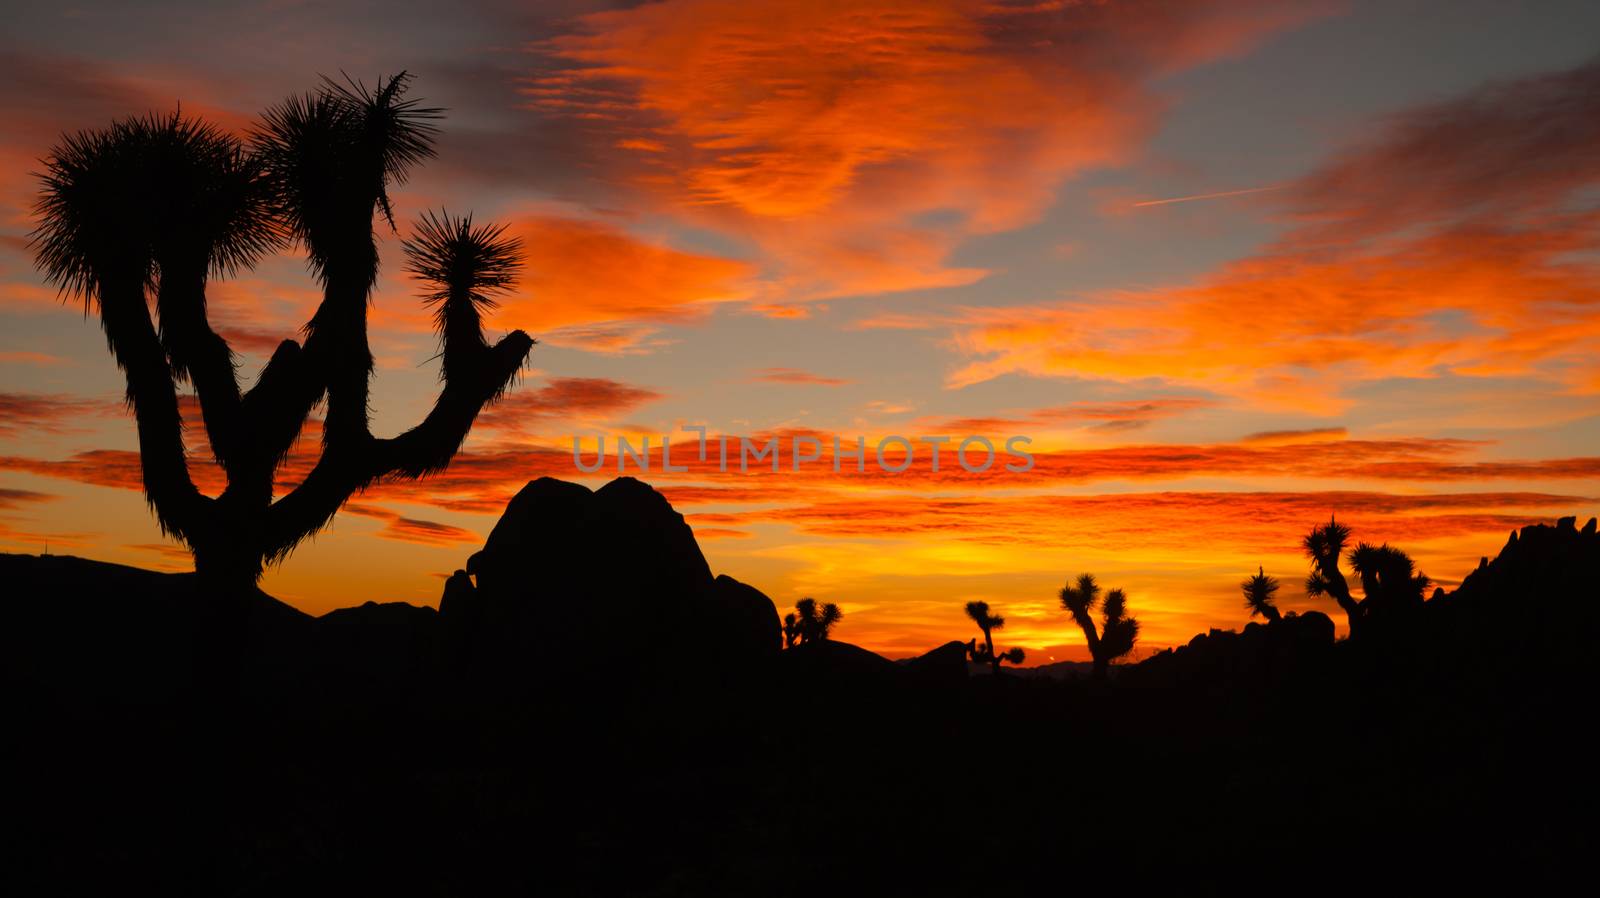 Joshua Tree Sunset Cloud Landscape California National Park  by ChrisBoswell